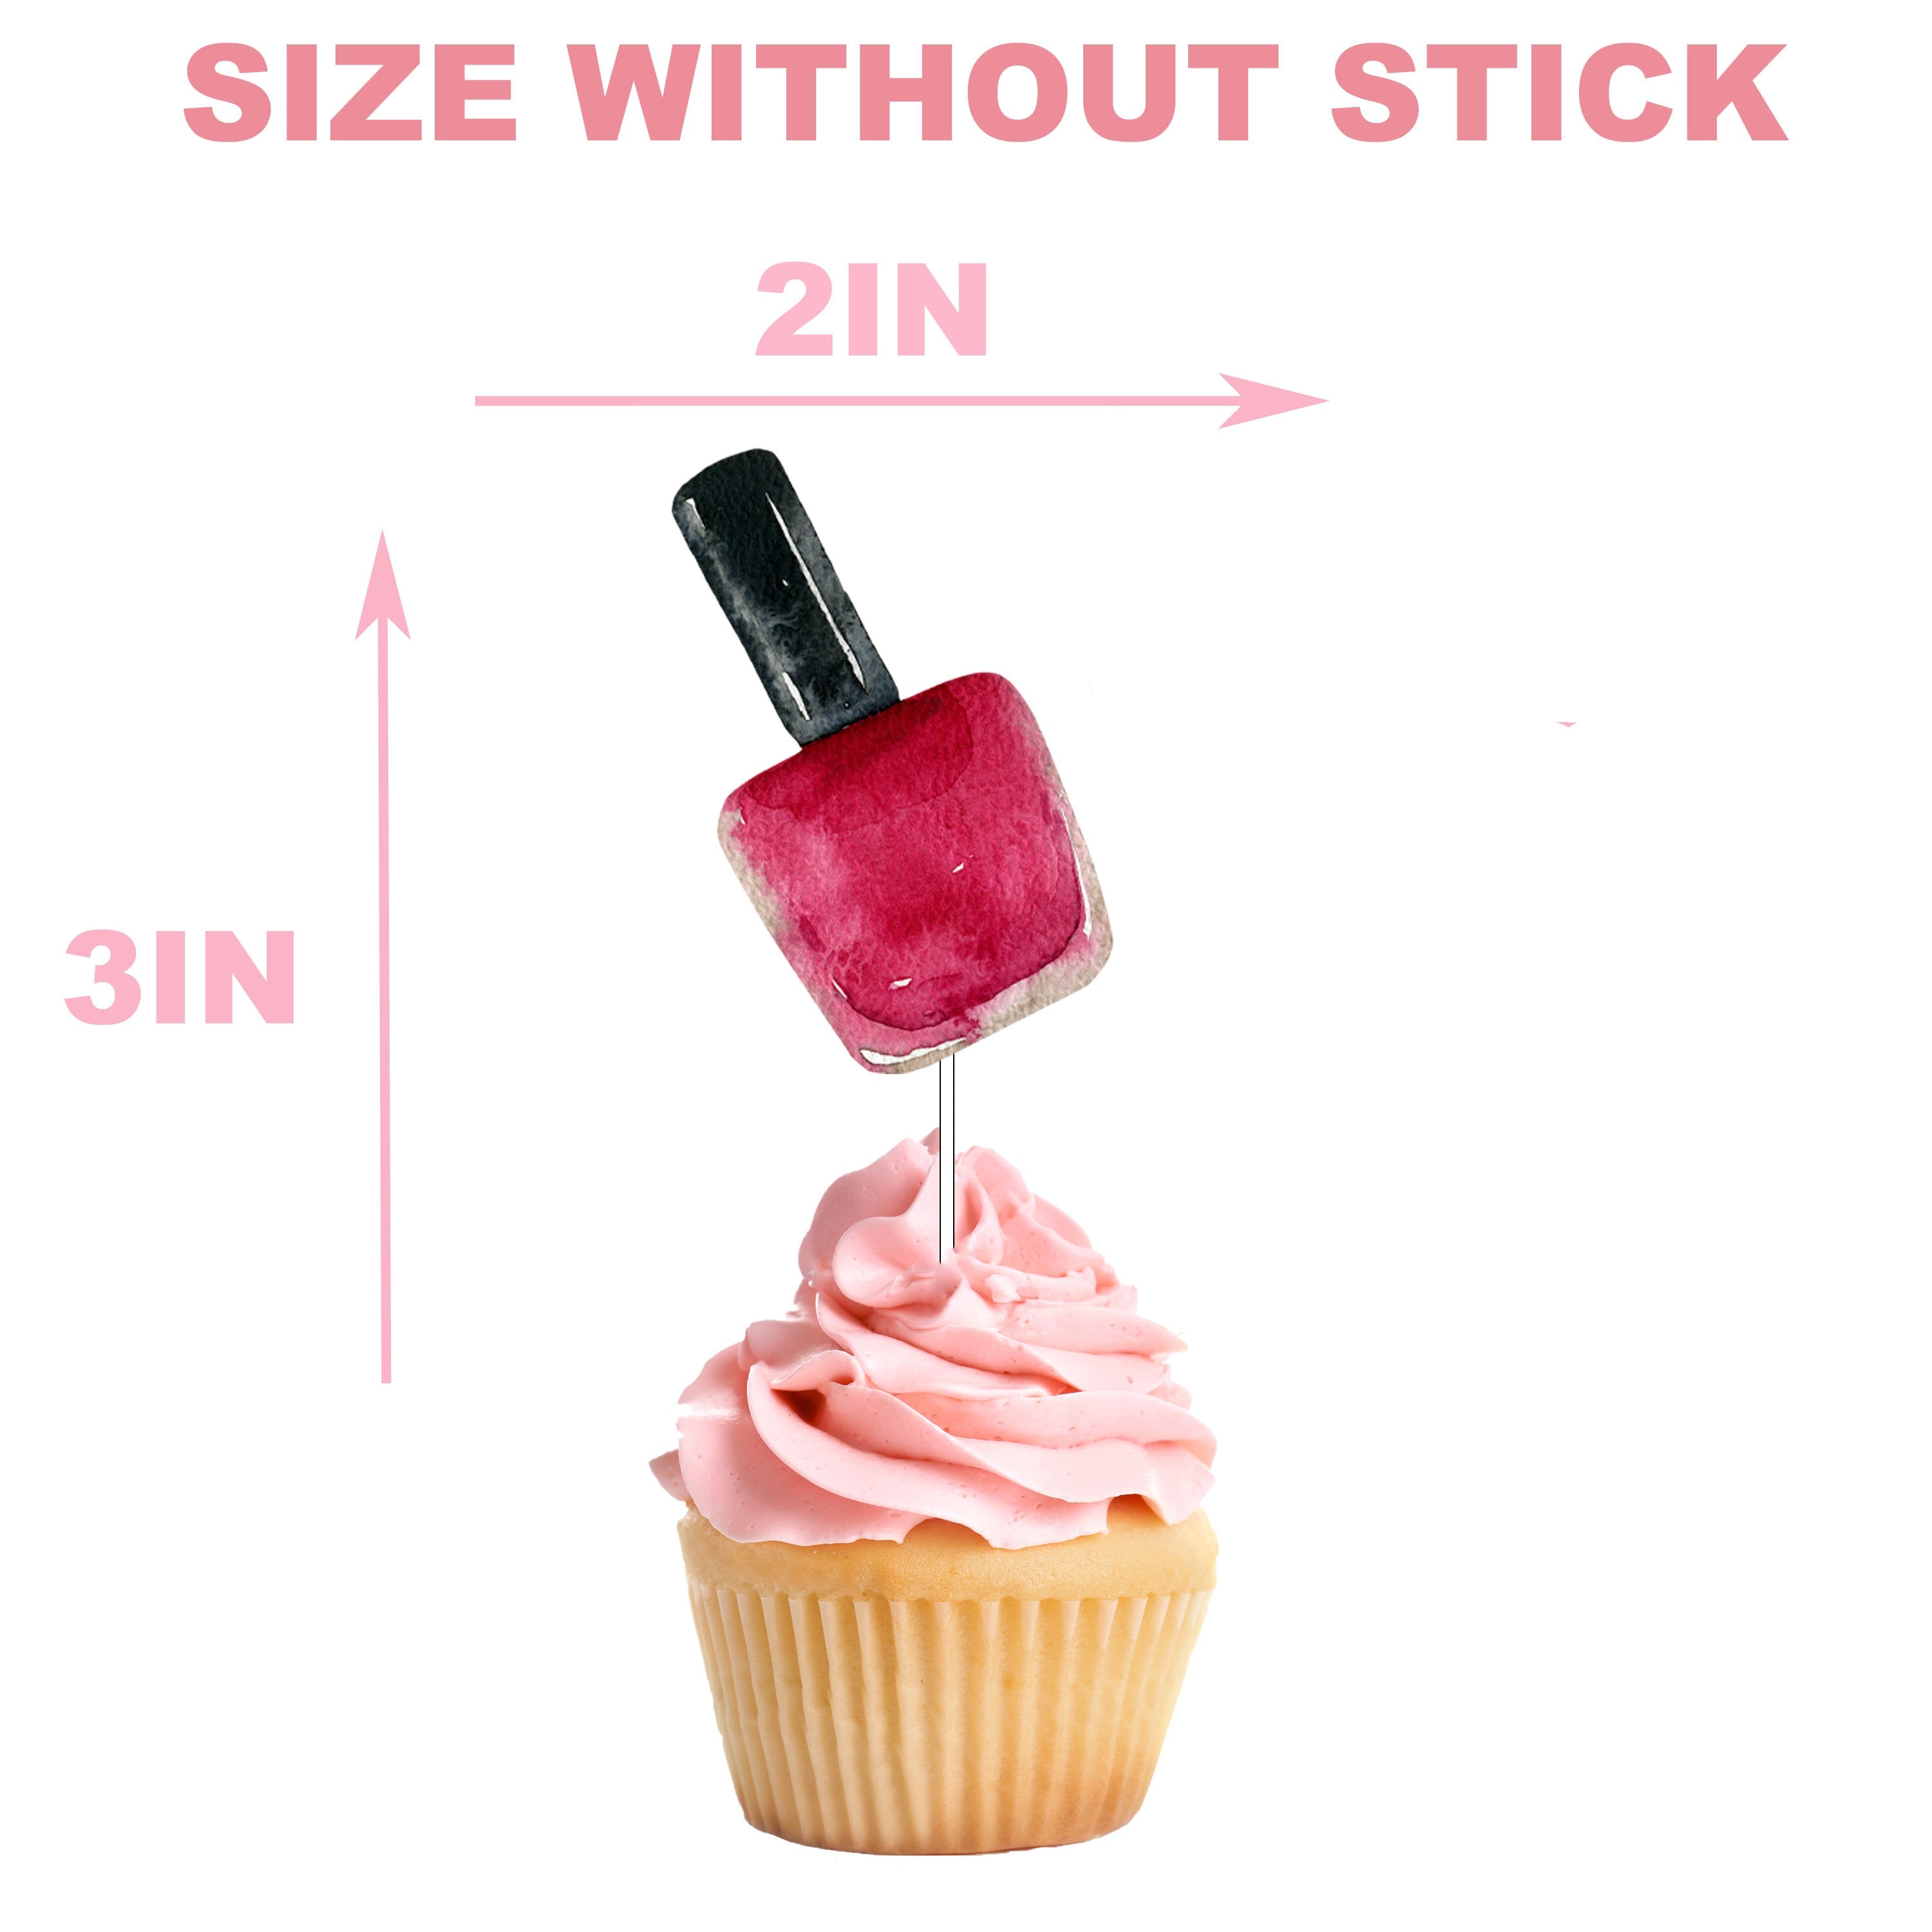 Chic Beauty Makeup Cupcake Toppers - Glam Up Your Celebration!